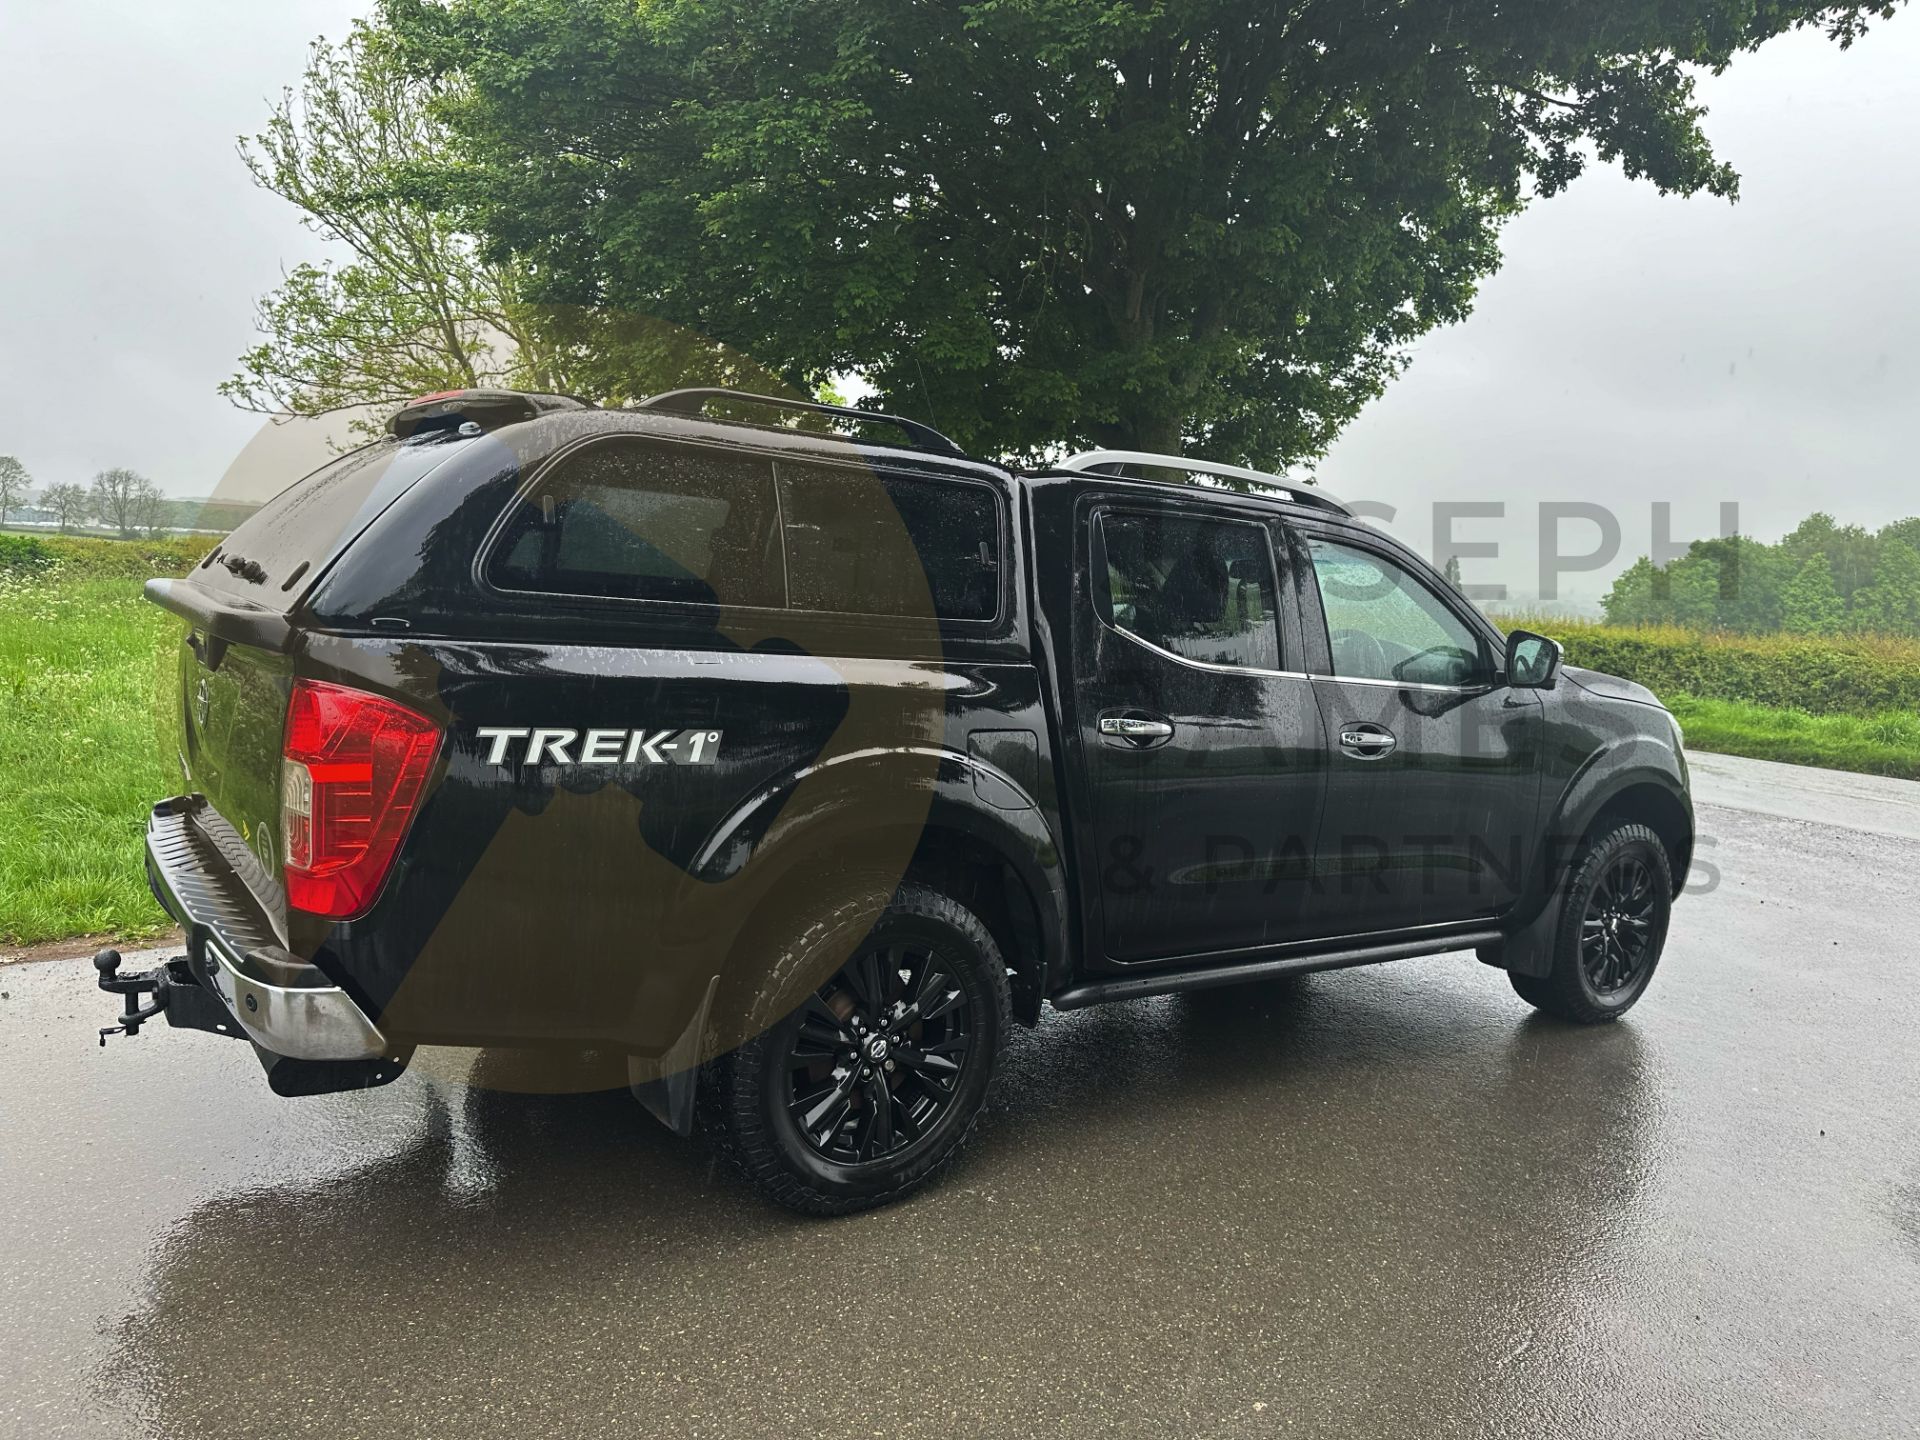 (ON SALE) NISSAN NAVARA *TREK-1 EDITION* DOUBLE CAB PICK-UP (2018 - EURO 6) 2.3 DCI - AUTOMATIC - Image 13 of 52